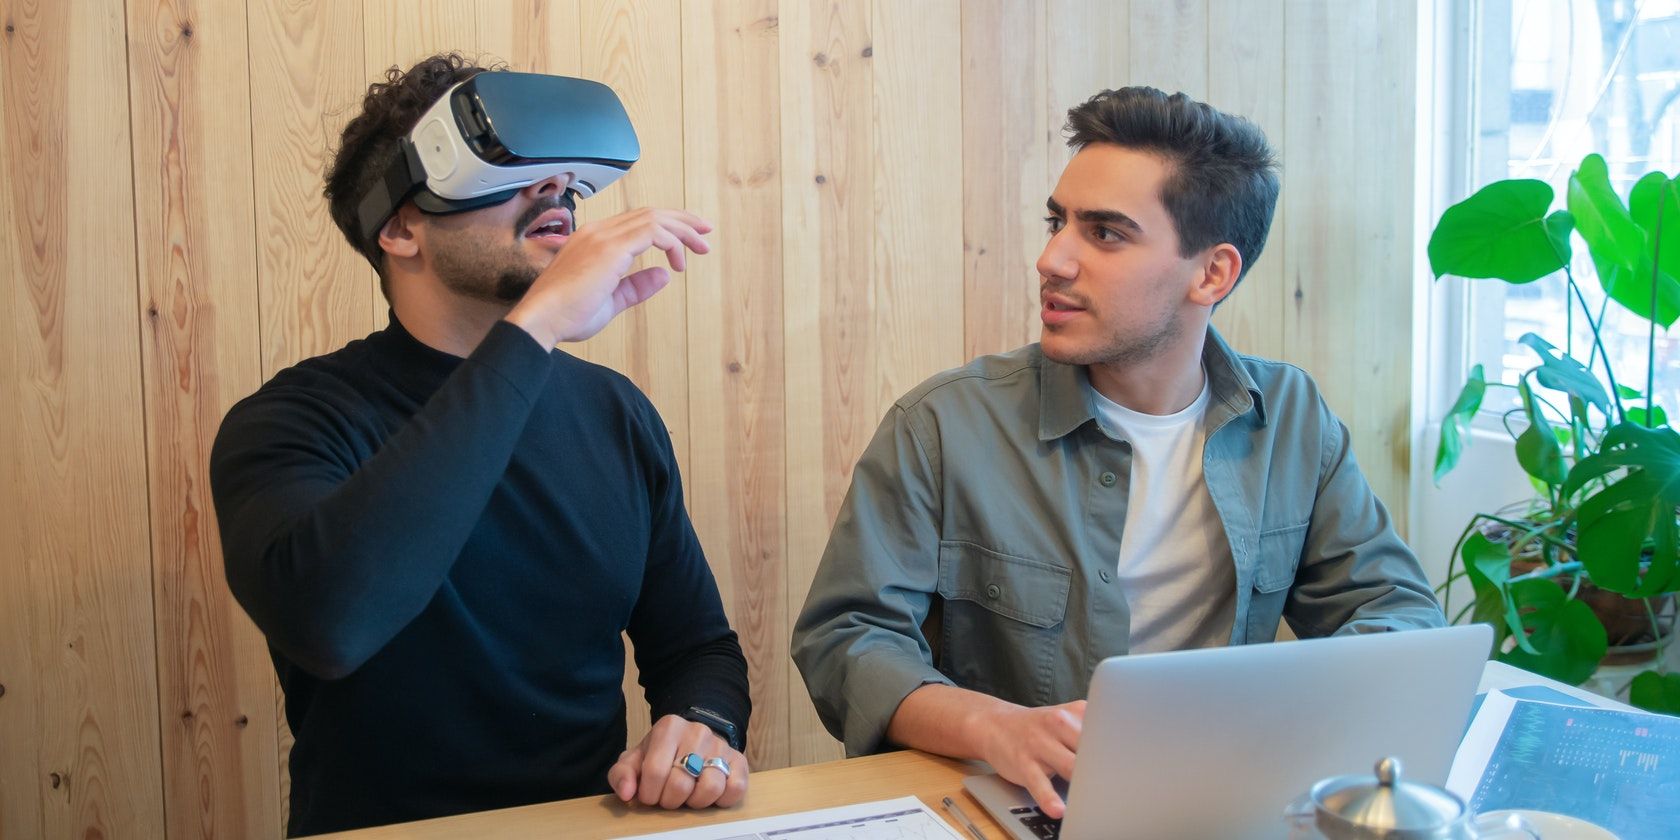 Image of a man using a virtual reality device while sitting next to another man using a laptop